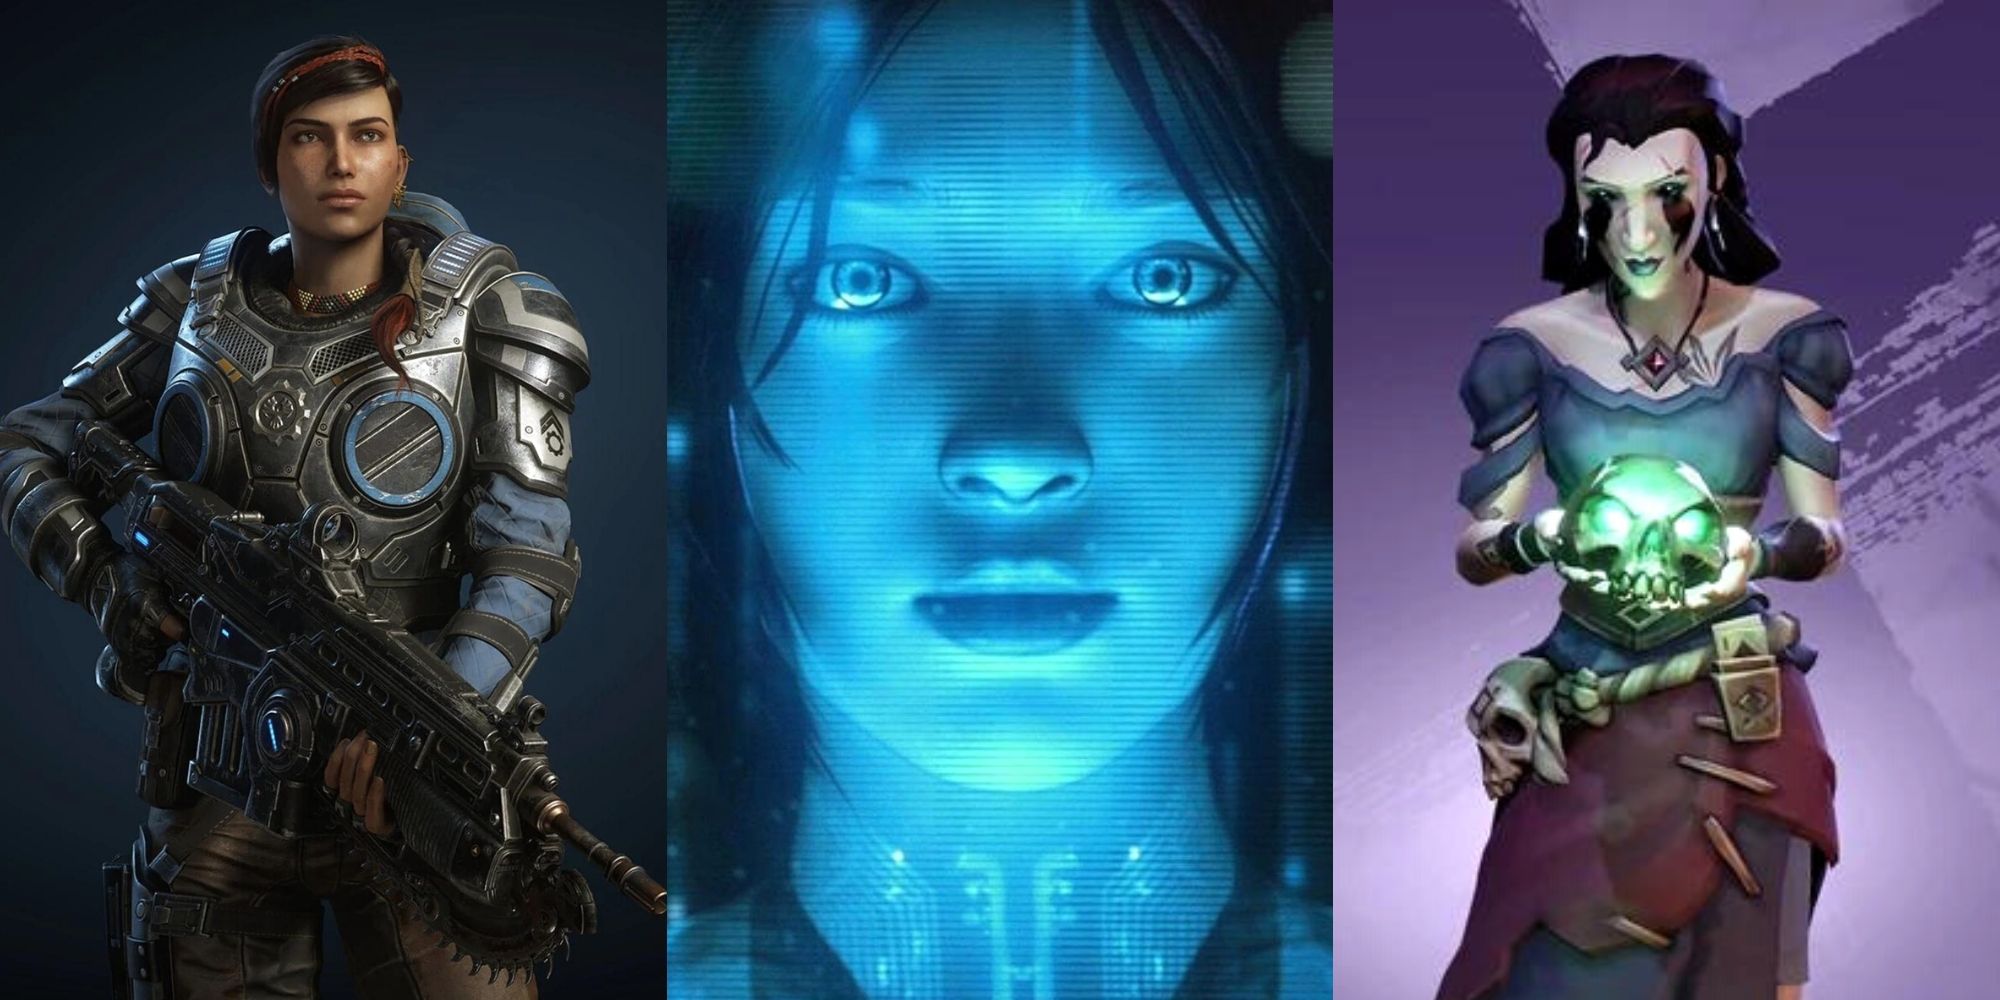 Kait Diaz in Gears 5, Cortana in Halo, Madame Olivia in Sea of Thieves